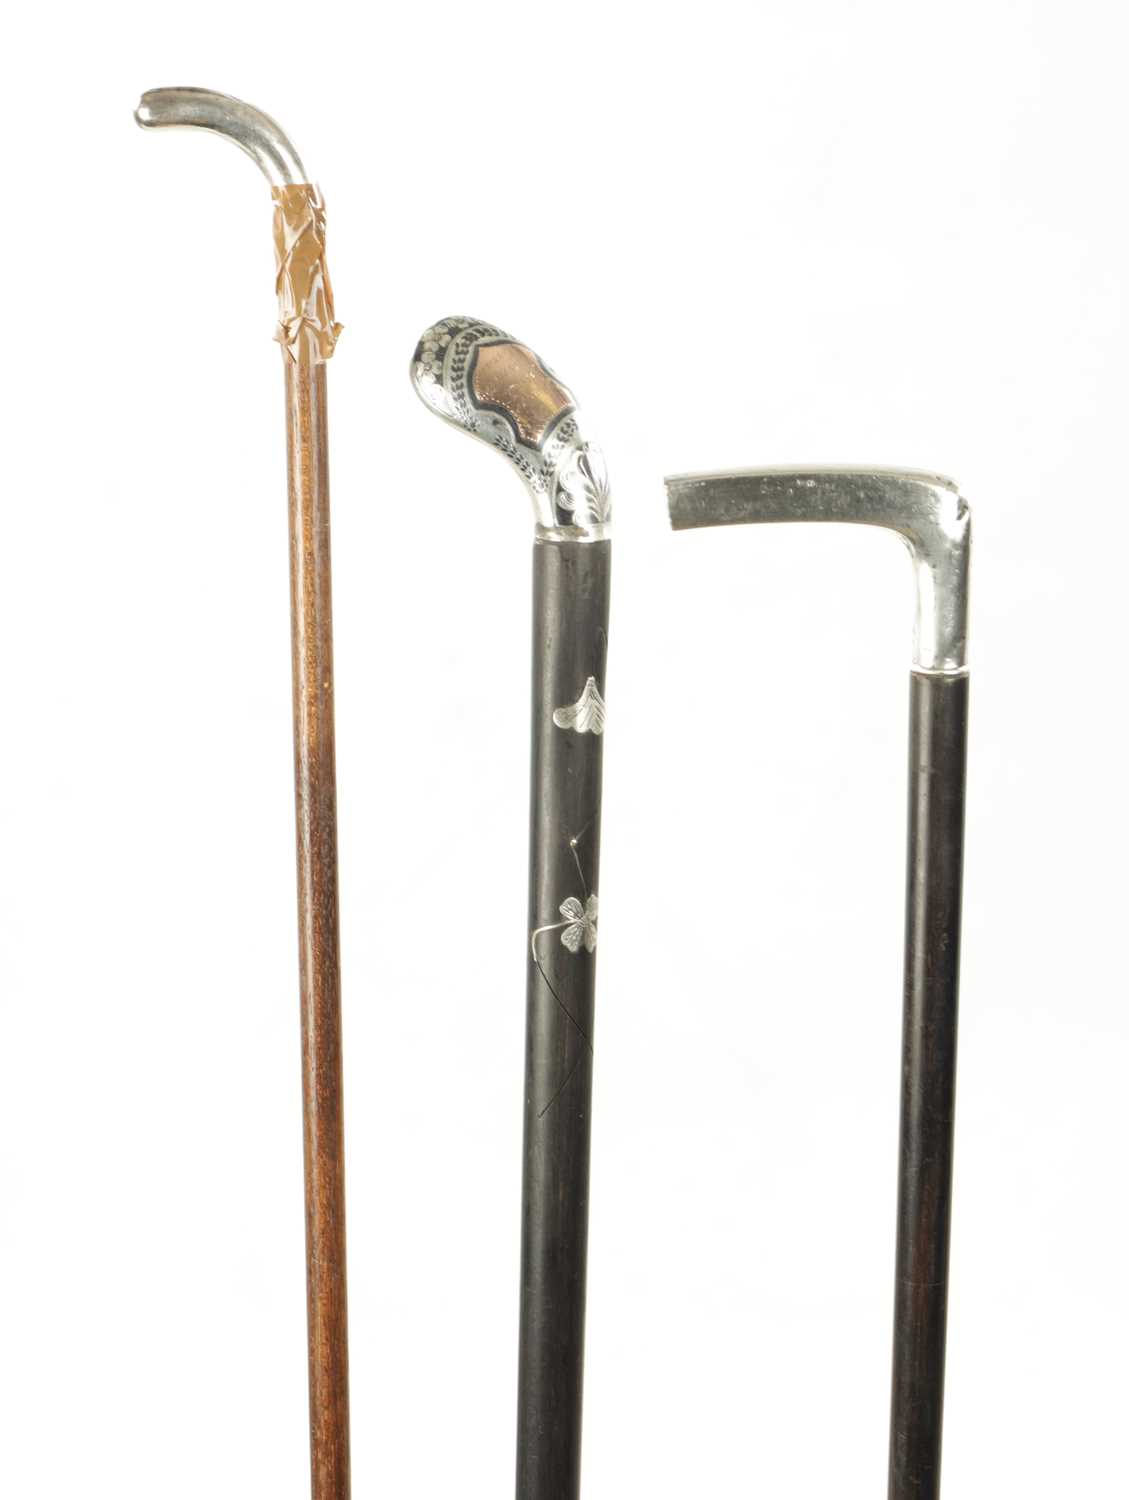 OF GOLFING INTEREST, A COLLECTION OF THREE 19TH CENTURY SILVER TOPPED WALKING STICKS